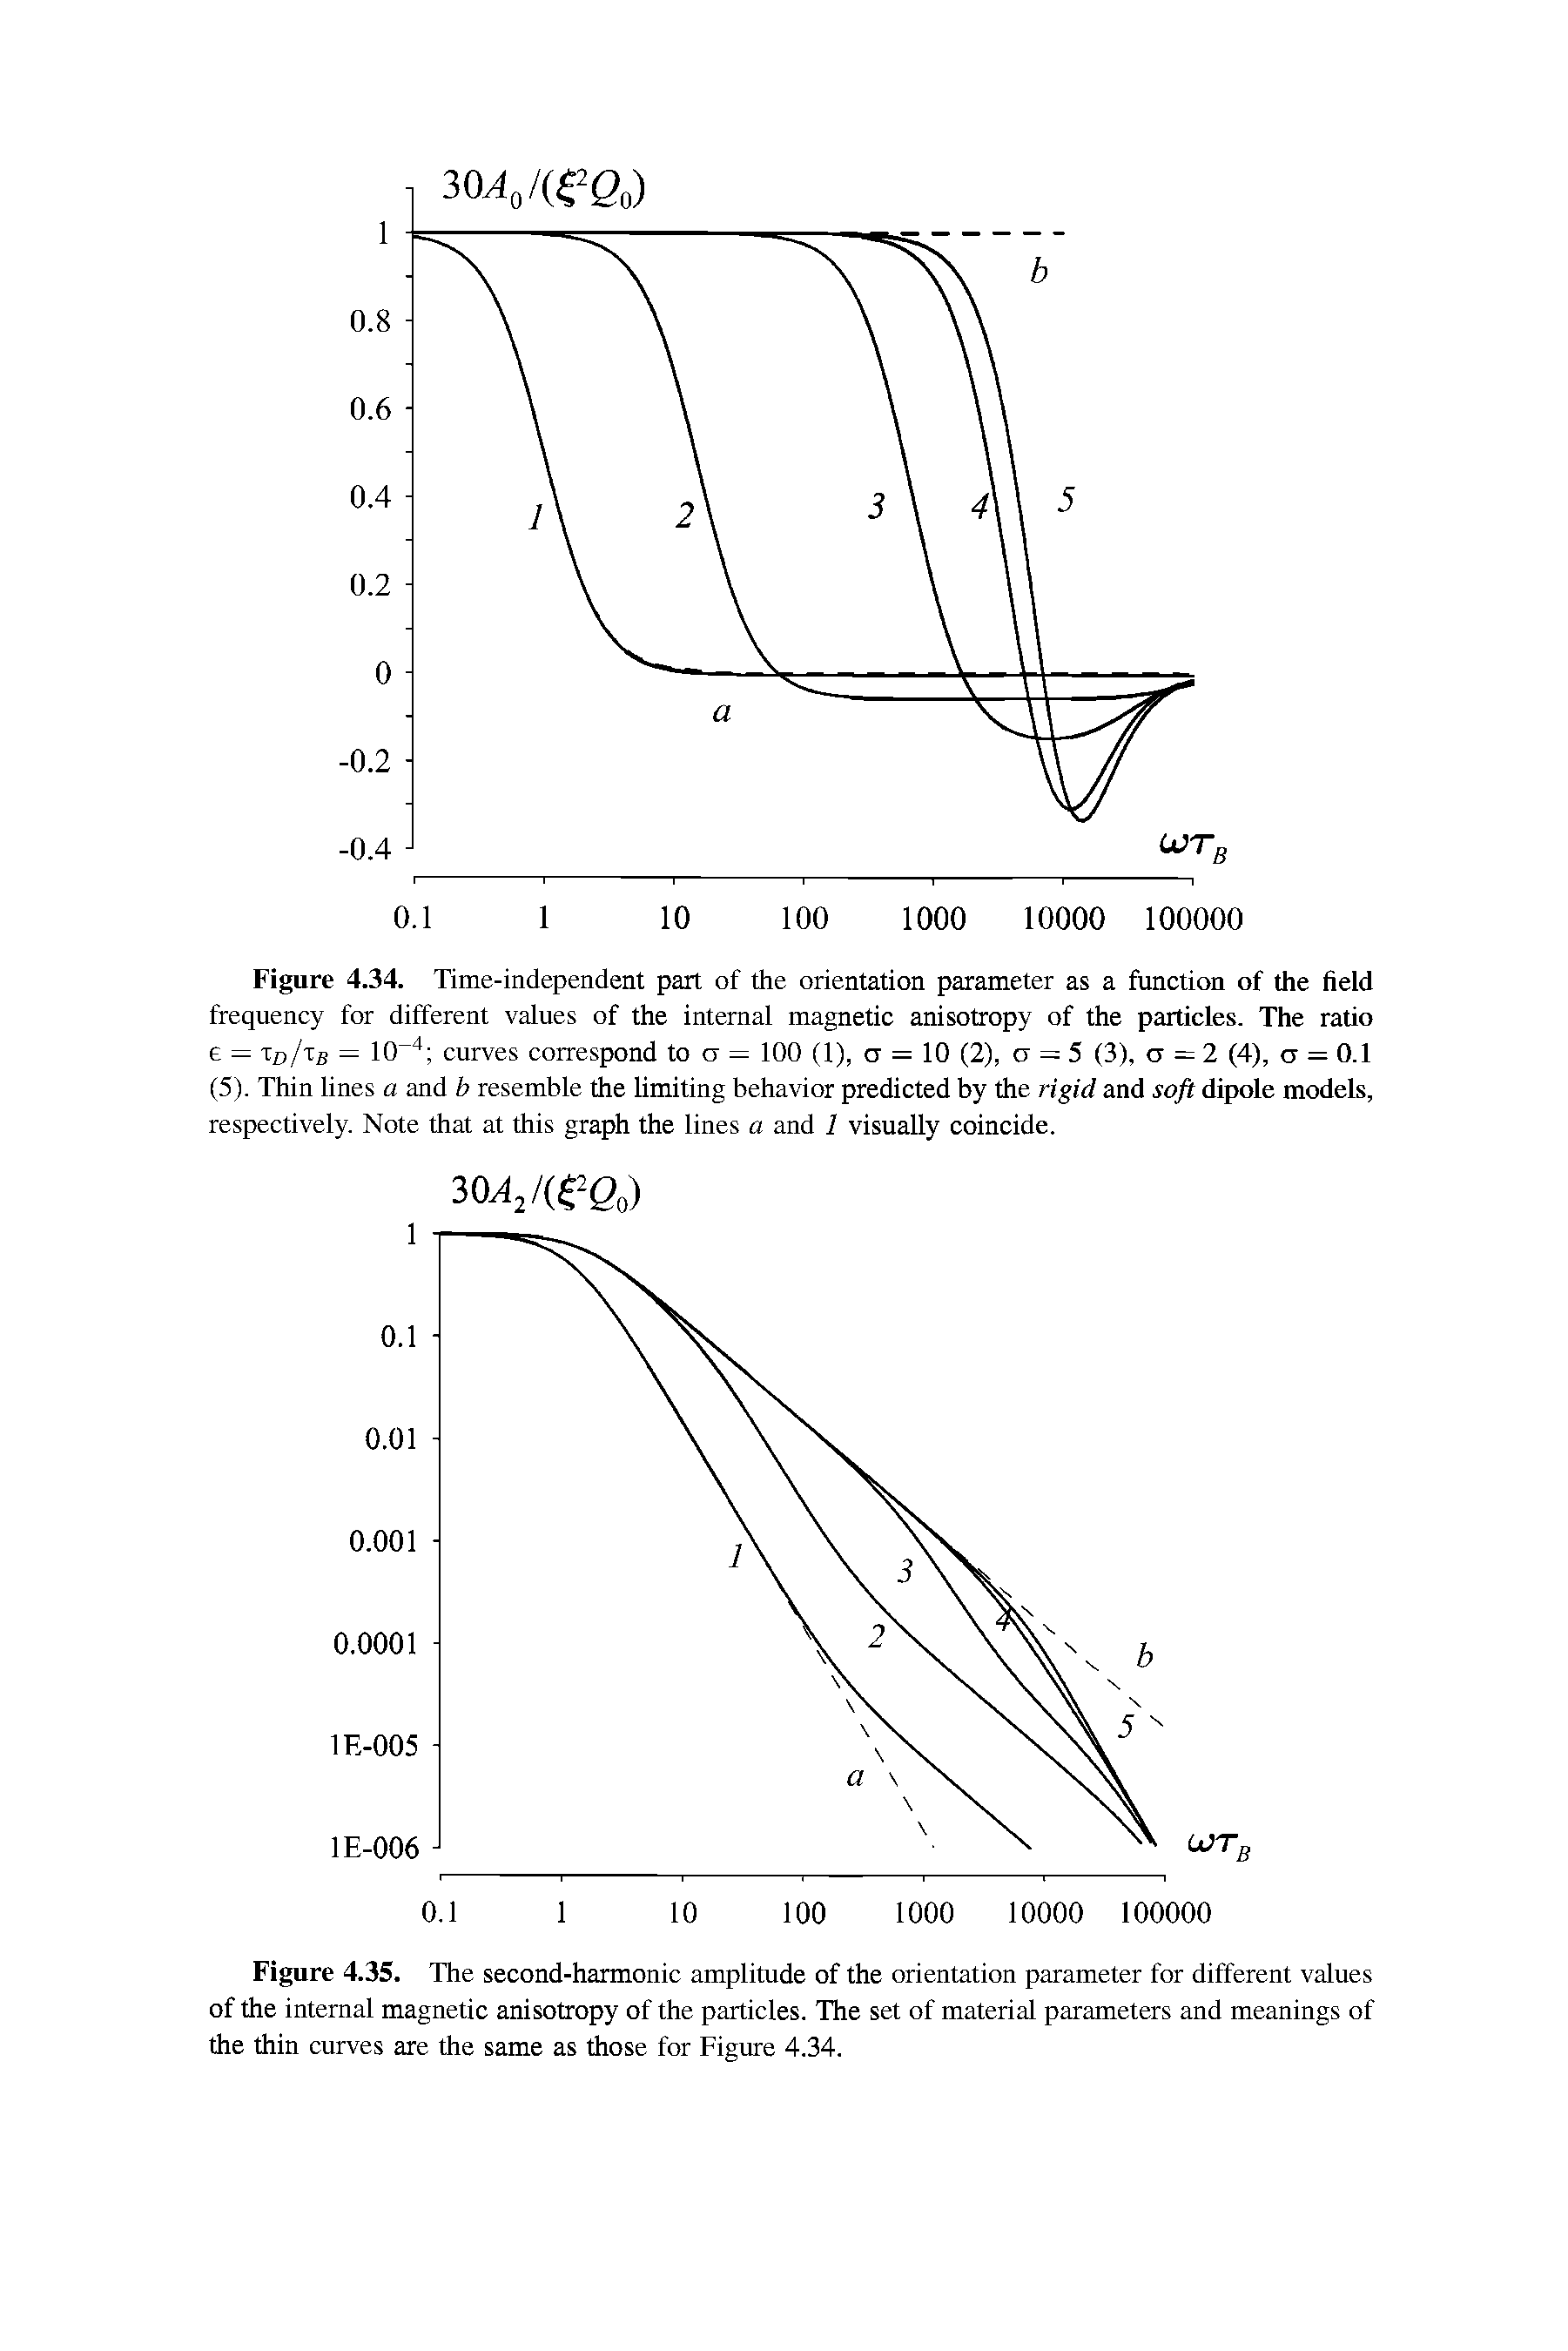 Figure 4.35. The second-harmonic amplitude of the orientation parameter for different values of the internal magnetic anisotropy of the particles. The set of material parameters and meanings of the thin curves are the same as those for Figure 4.34.